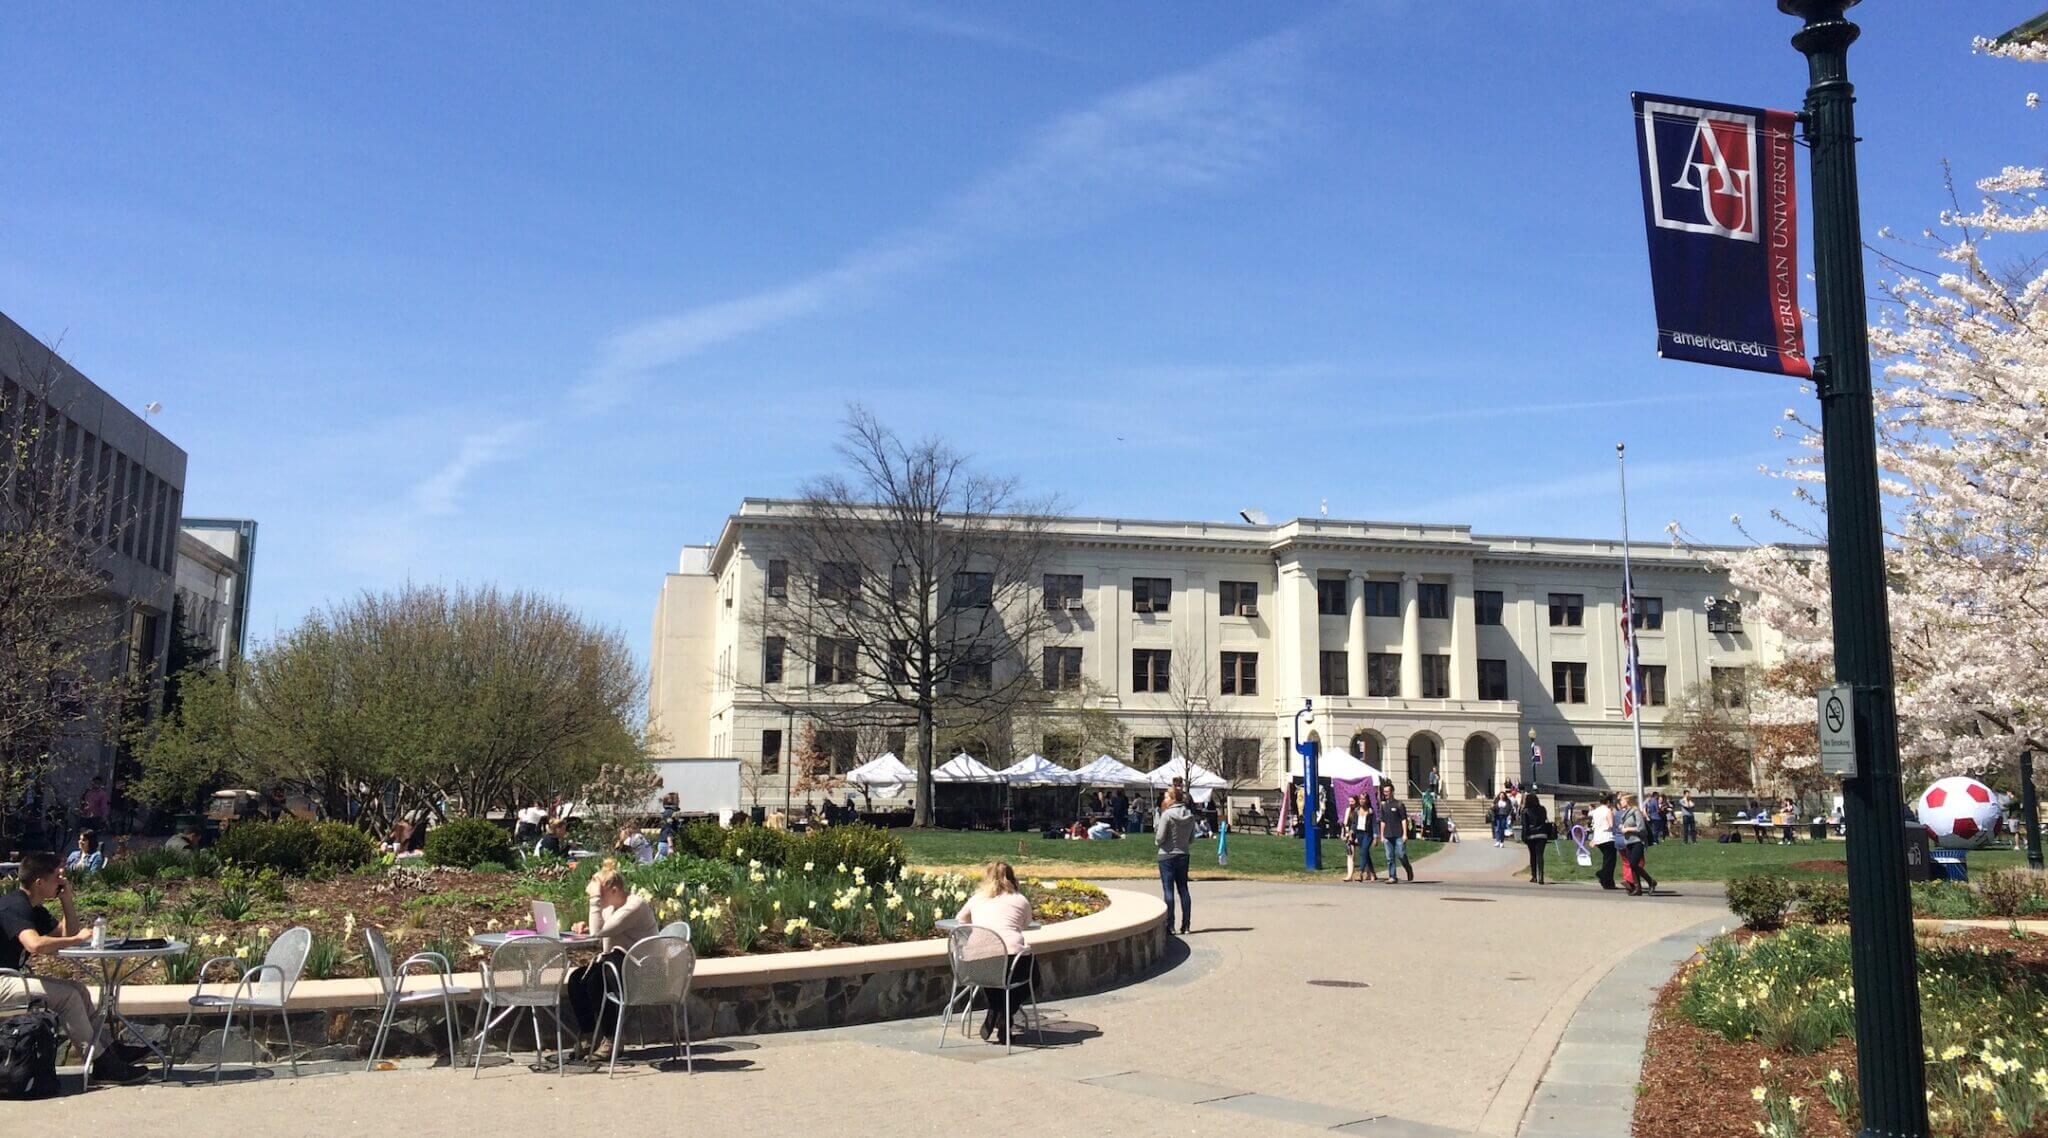 The campus of American University in Washington, D.C., 2016.